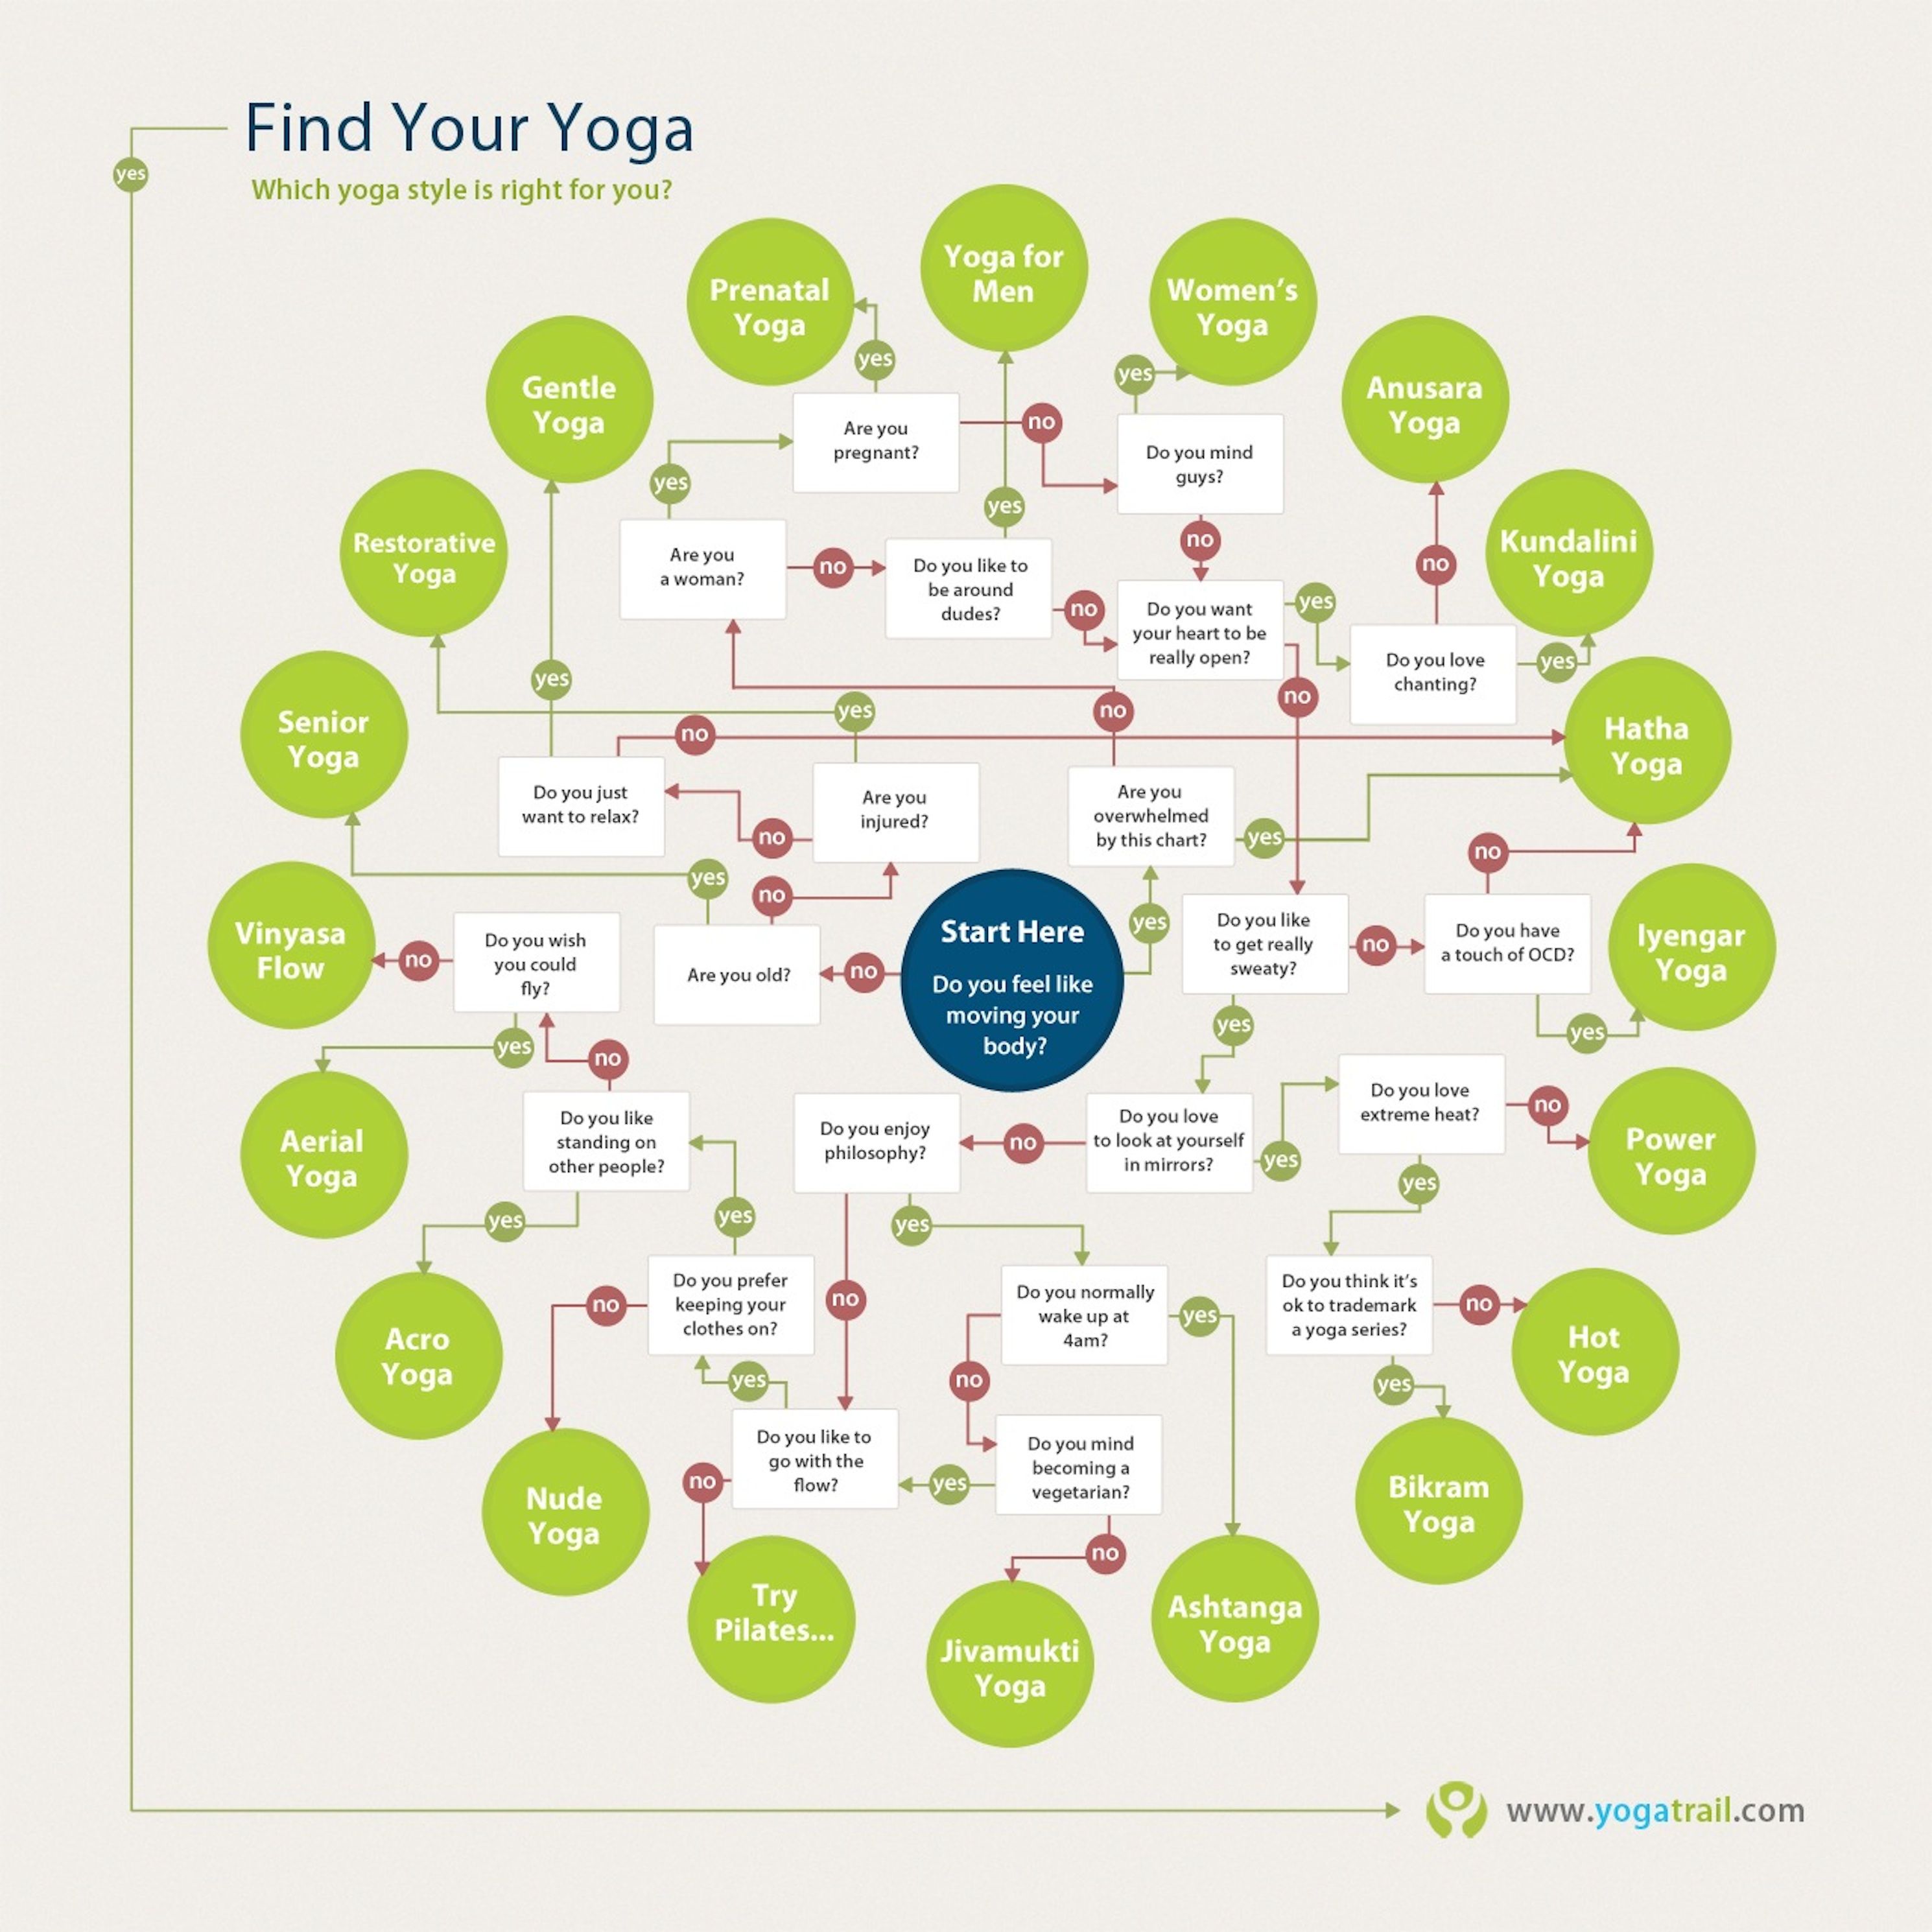 Everything You Need To Know About Your Next Yoga Class -- In One Chart